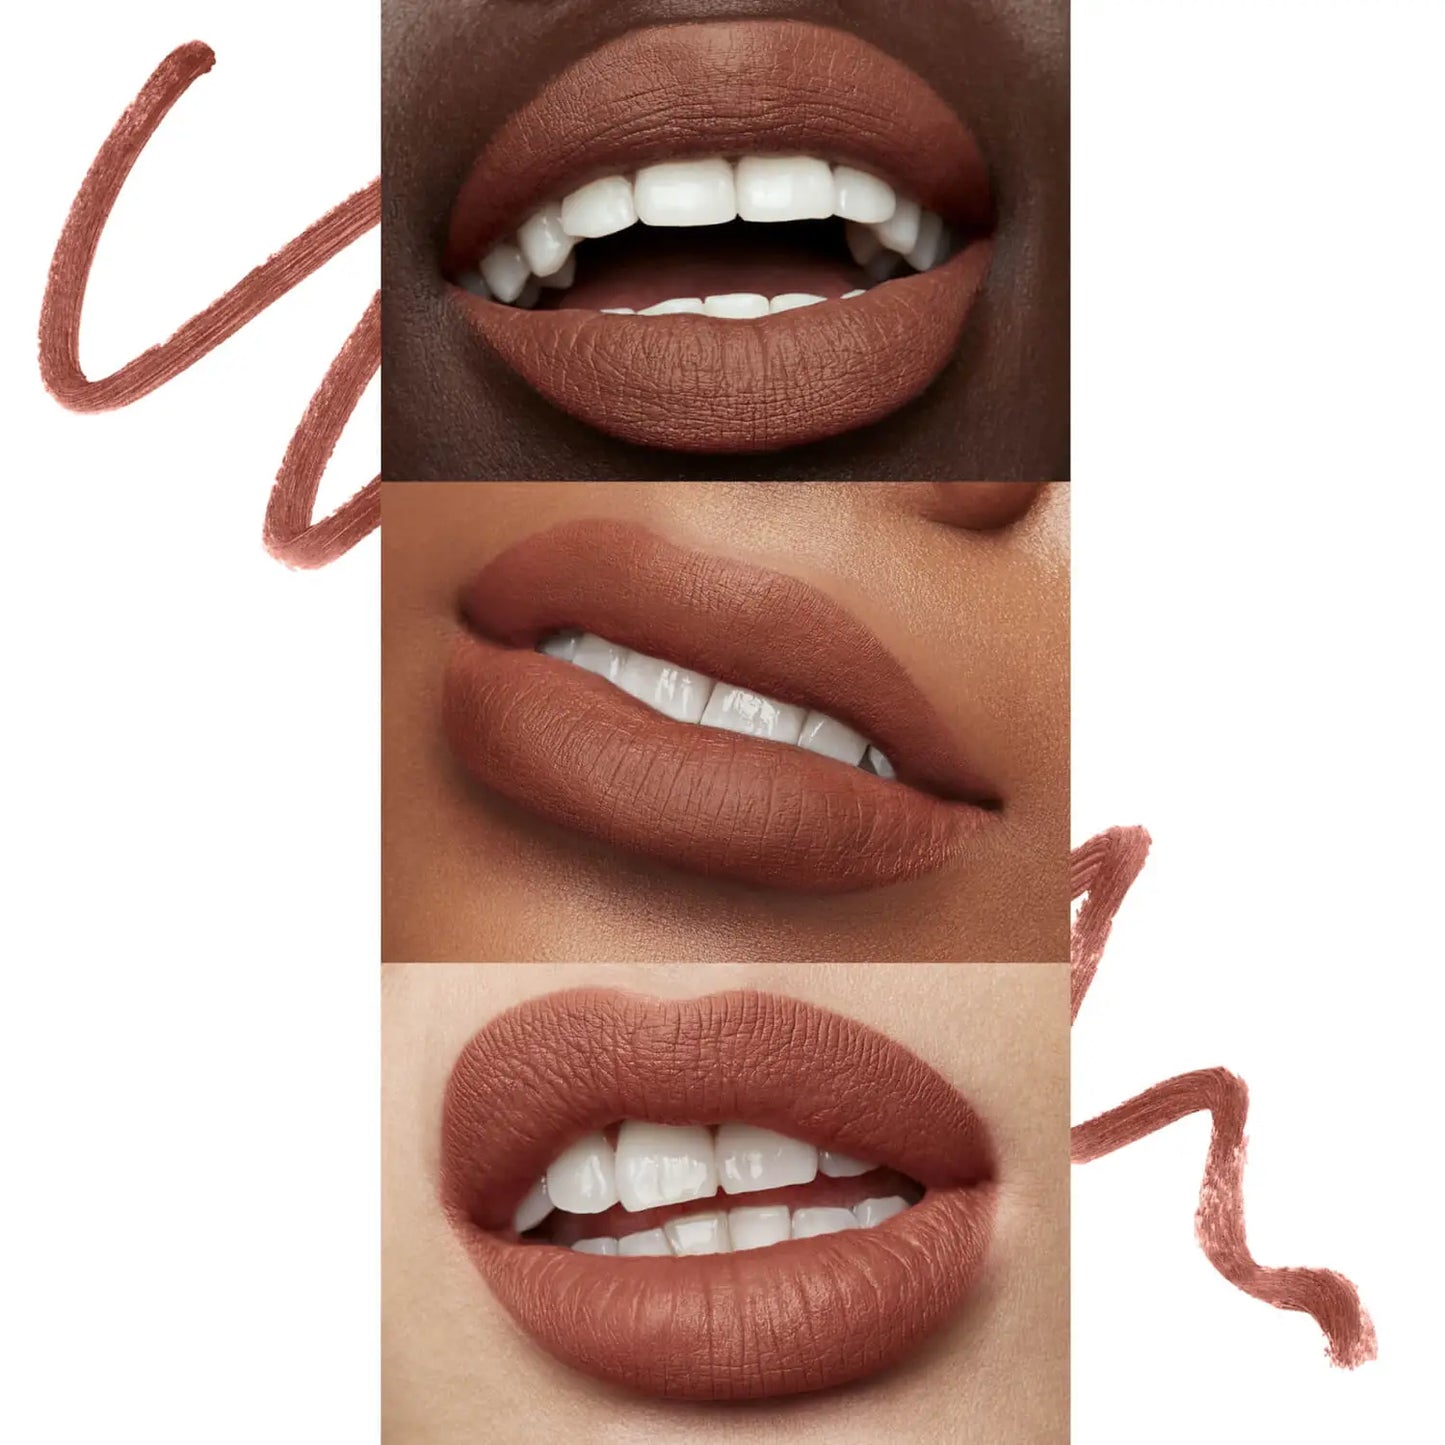 Smashbox After The After Party Lip Set | The Neutrals